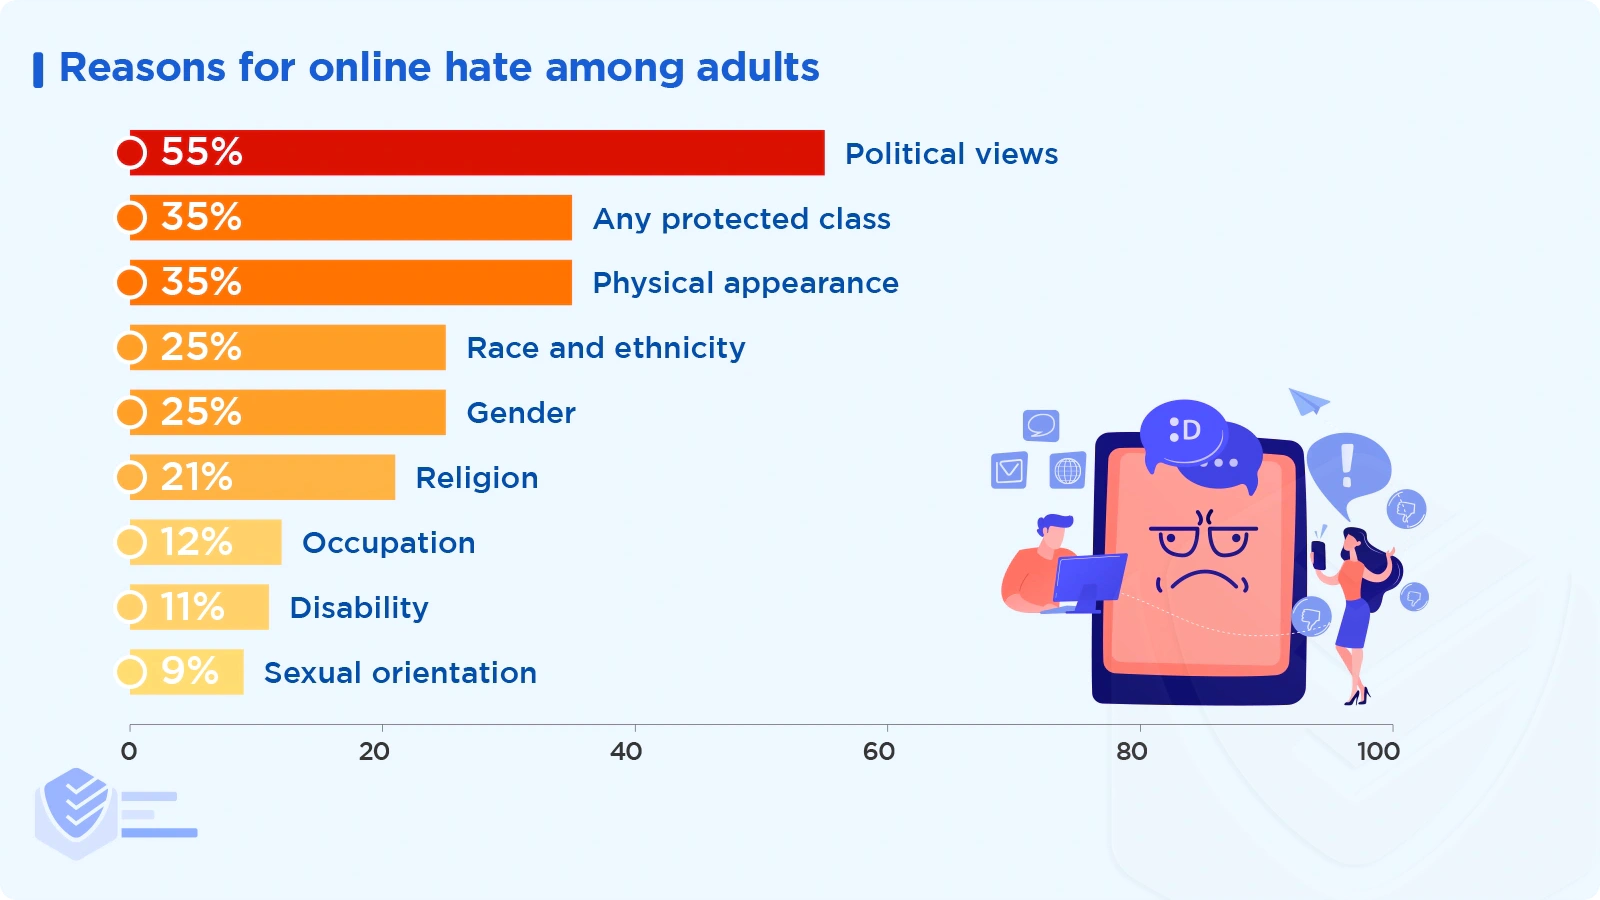 Reasons for online hate among adults